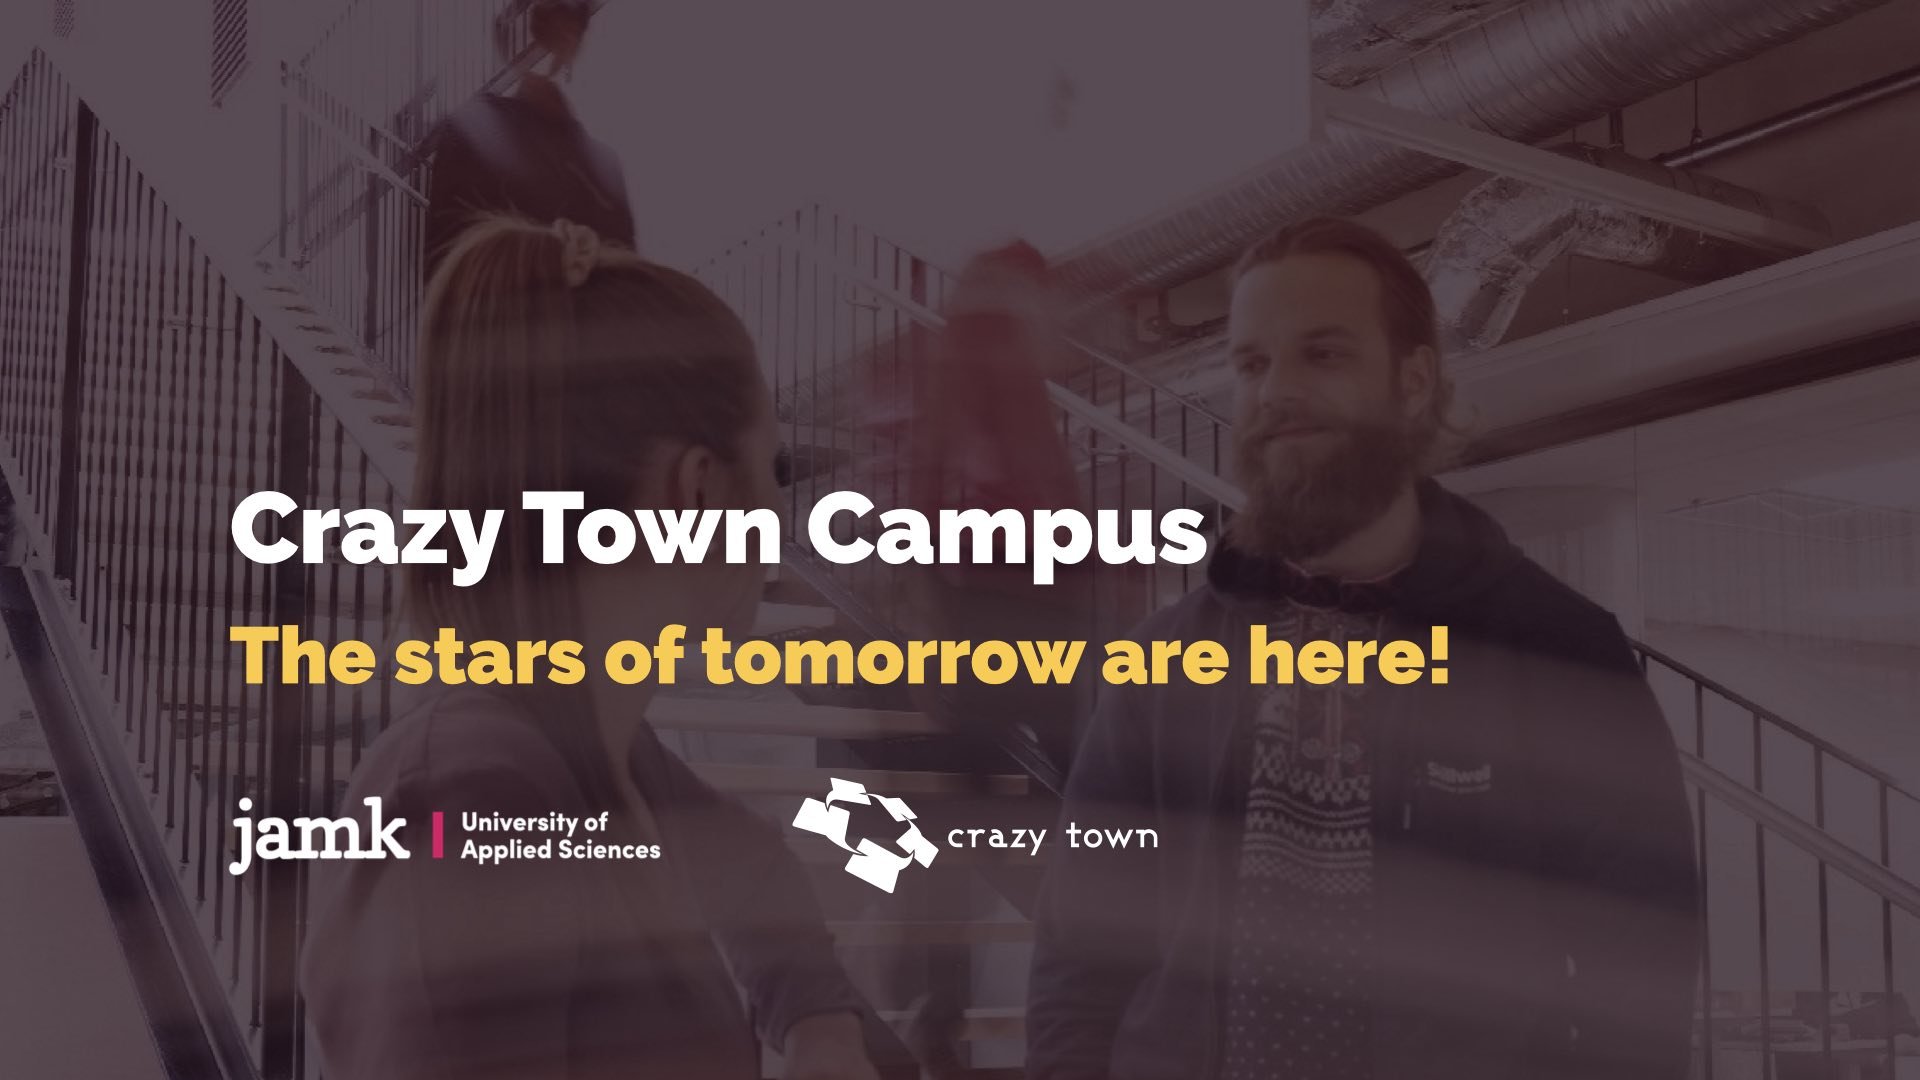 Crazy Town Campus – The stars of tomorrow are here!